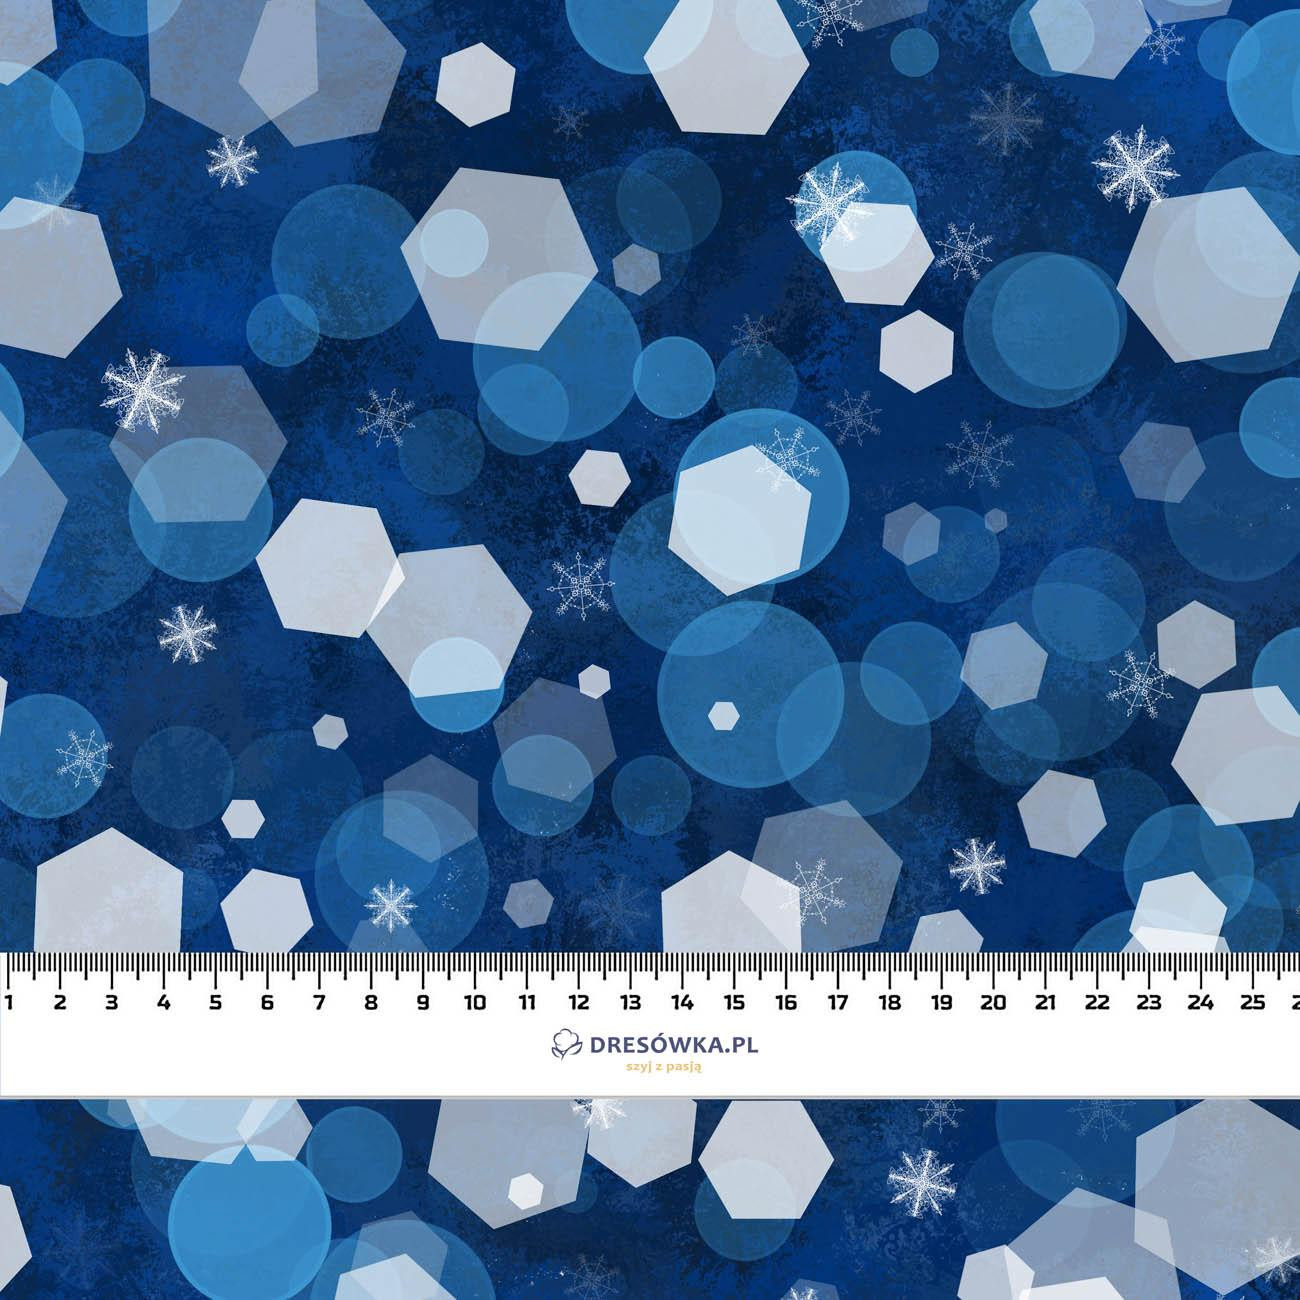 WINTER HEXAGON (WINTER IS COMING) - Cotton woven fabric